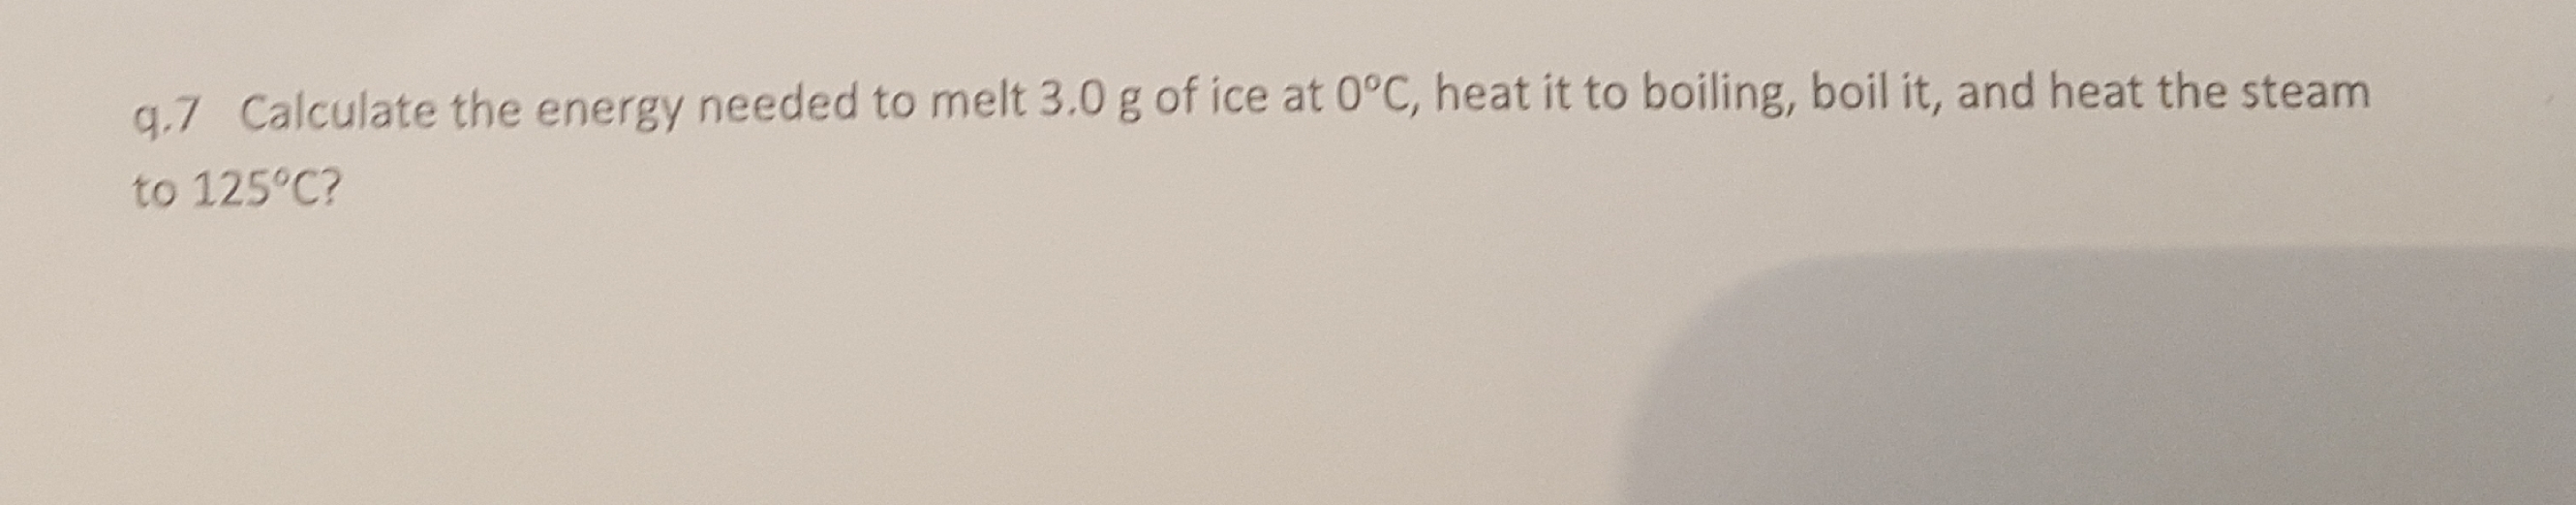 q,.7 Calculate the energy needed to melt 3.0 g of ice at o°c, heat it to boiling, boil it, and heat the steam
to 125°C?
